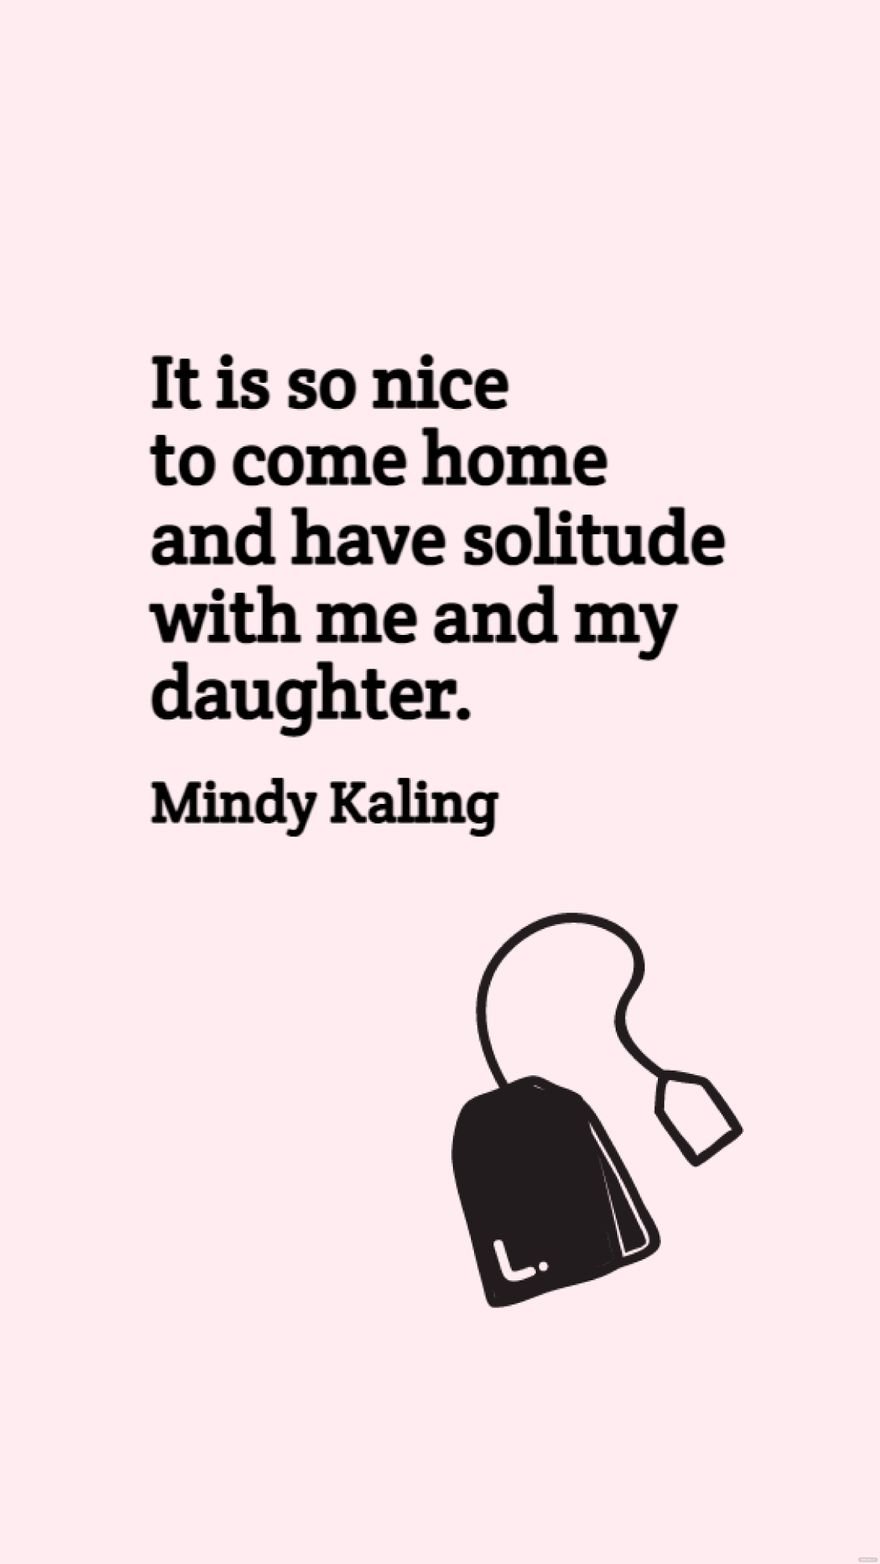 Free Mindy Kaling - It is so nice to come home and have solitude with me and my daughter. in JPG